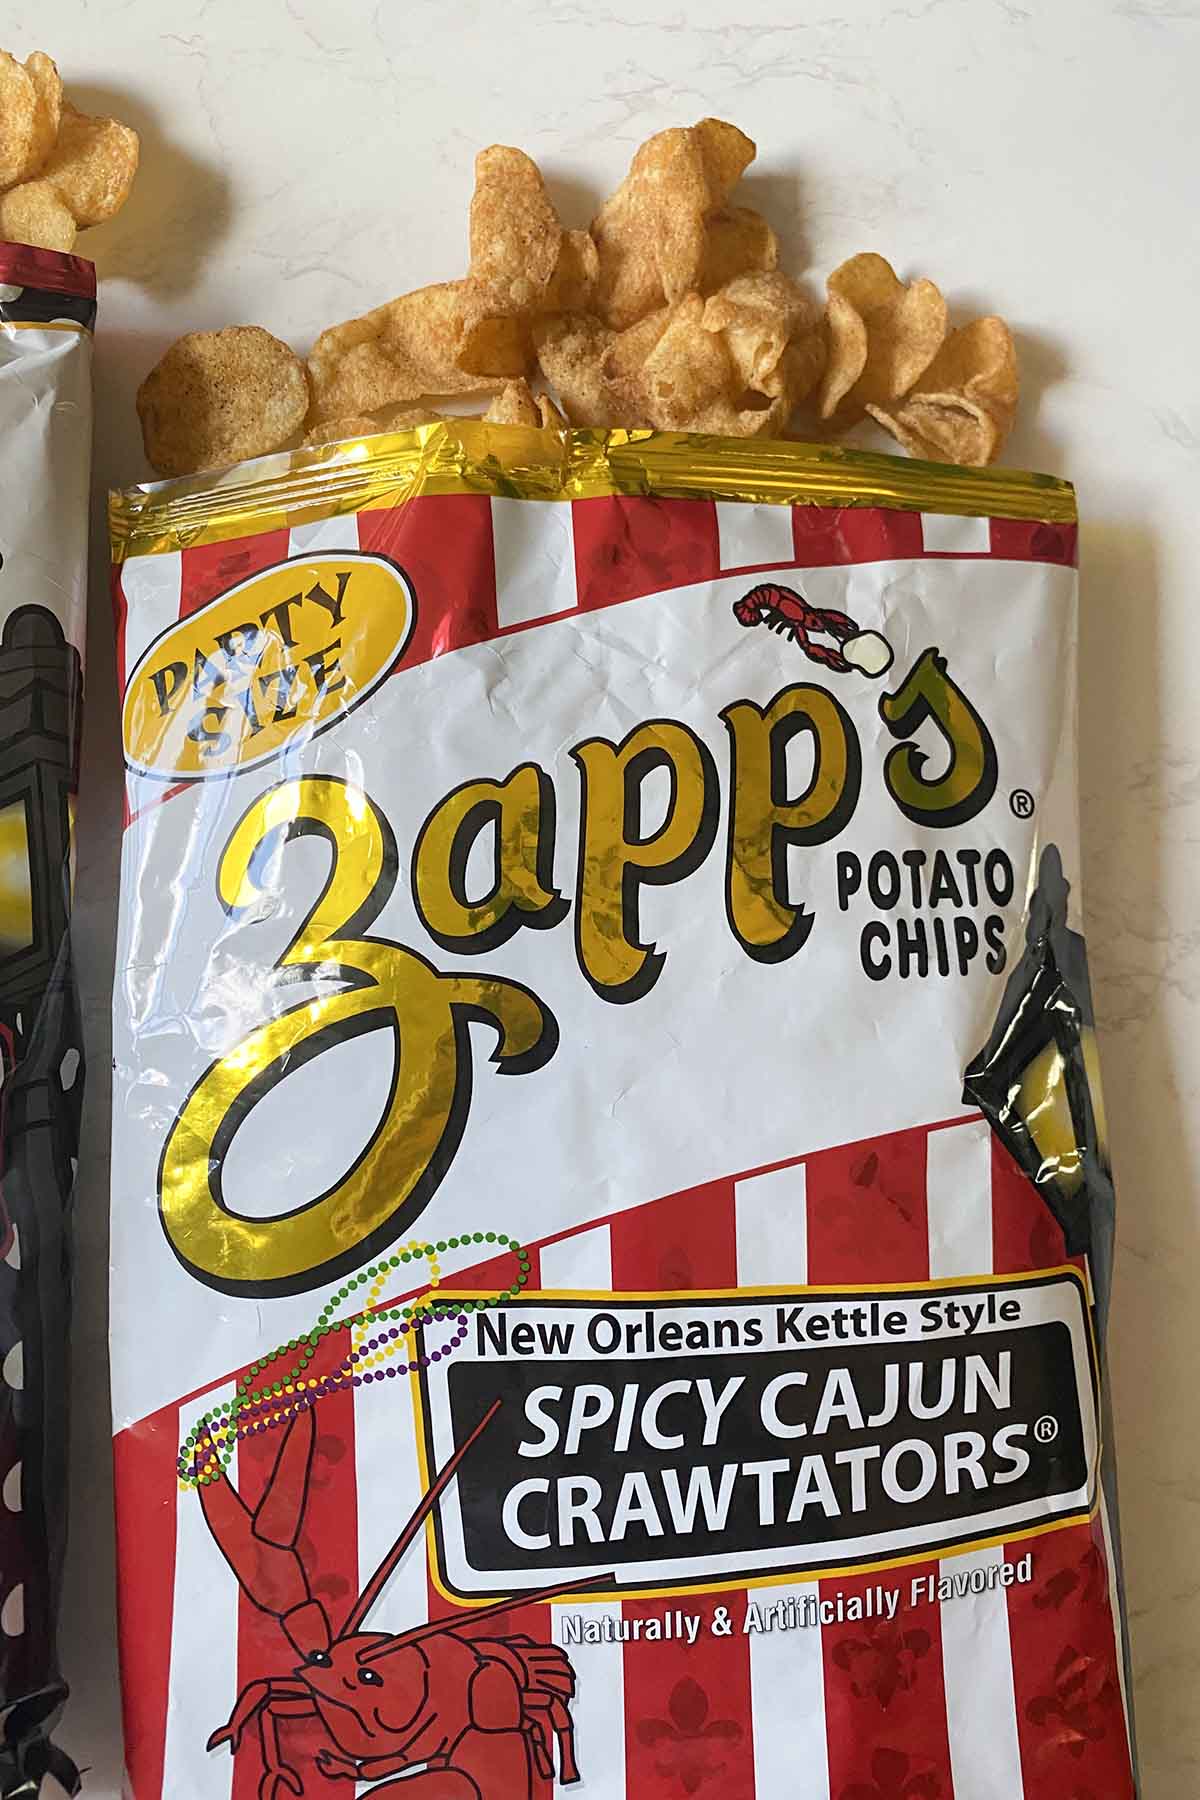 bag of Zapp's Spicy Cajun Crawtators chips with chips spilling out, so you can see what they look like